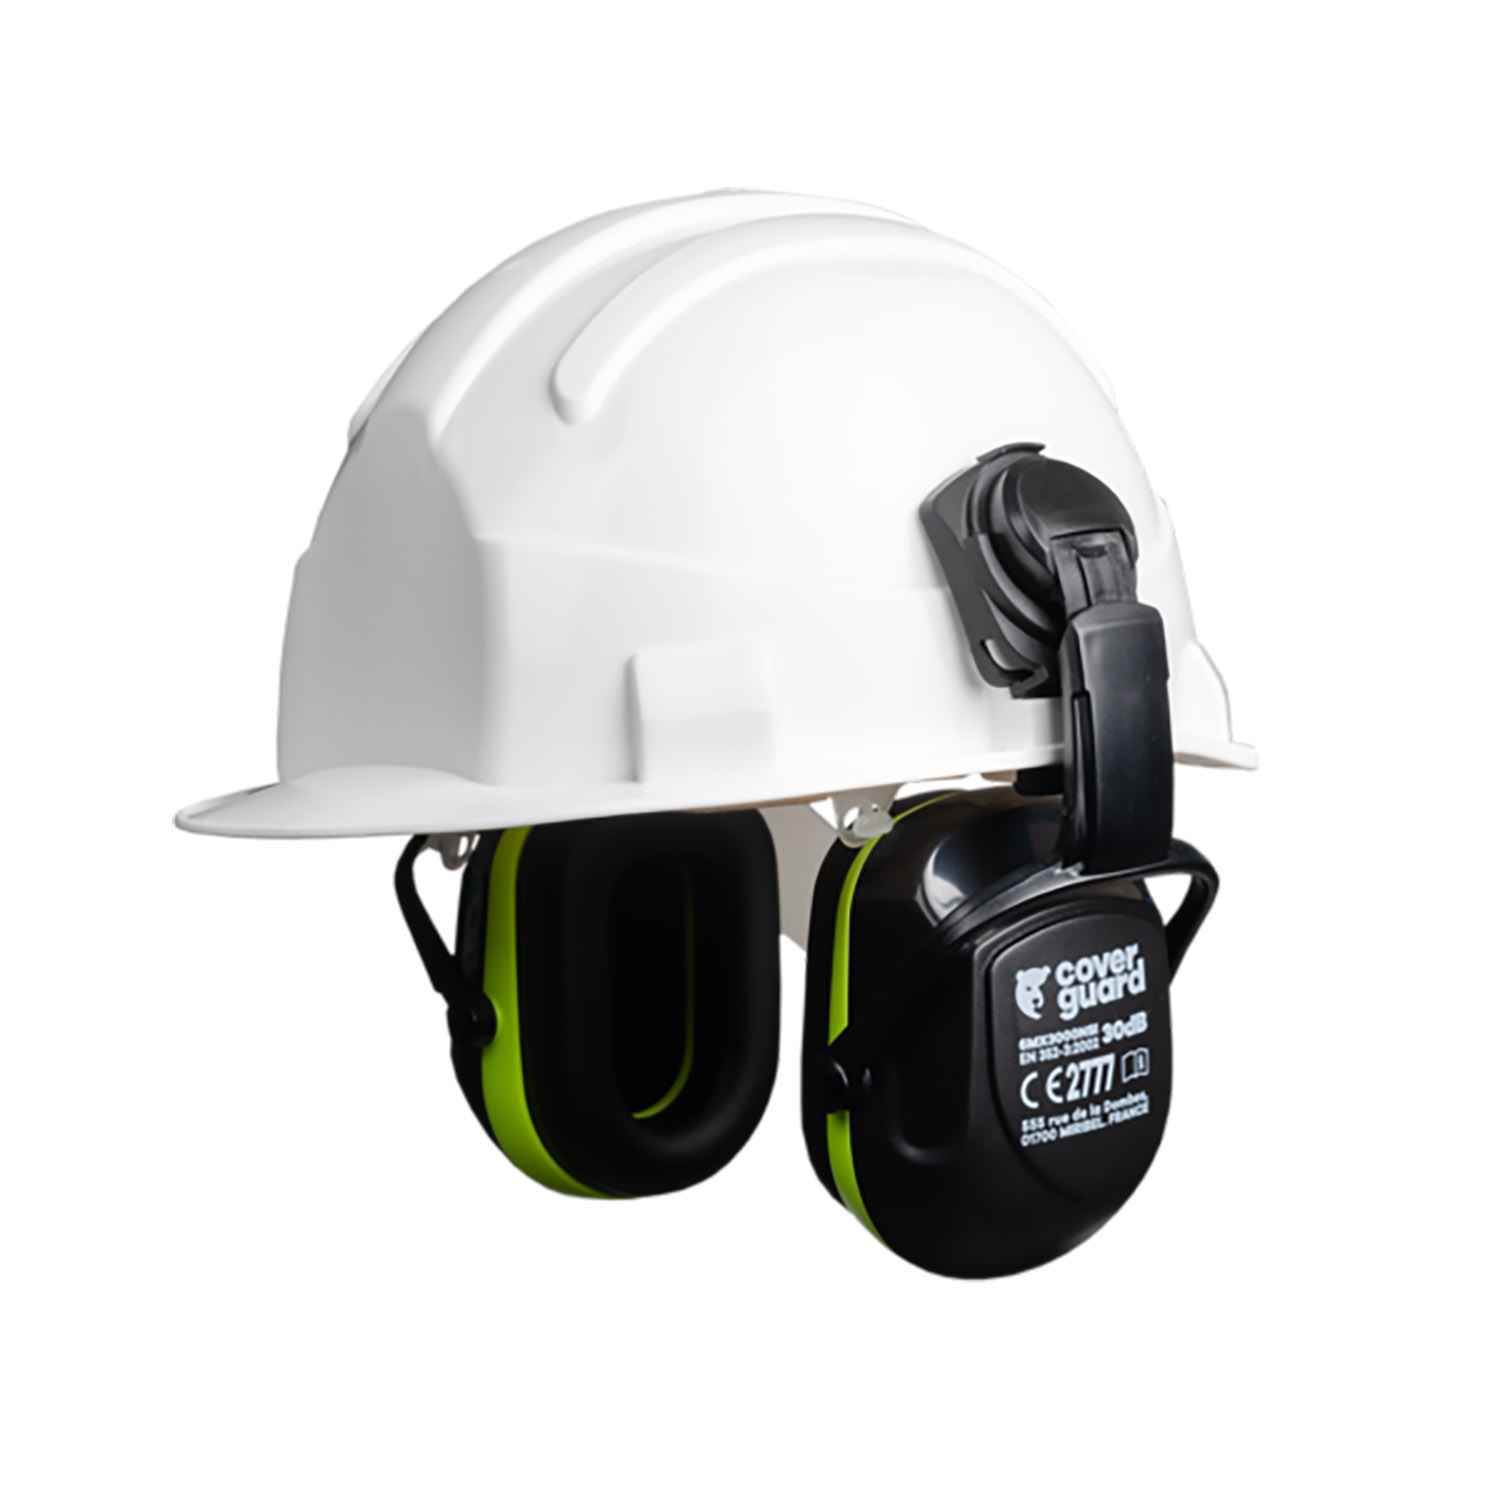 Earcups for Safety Helmet